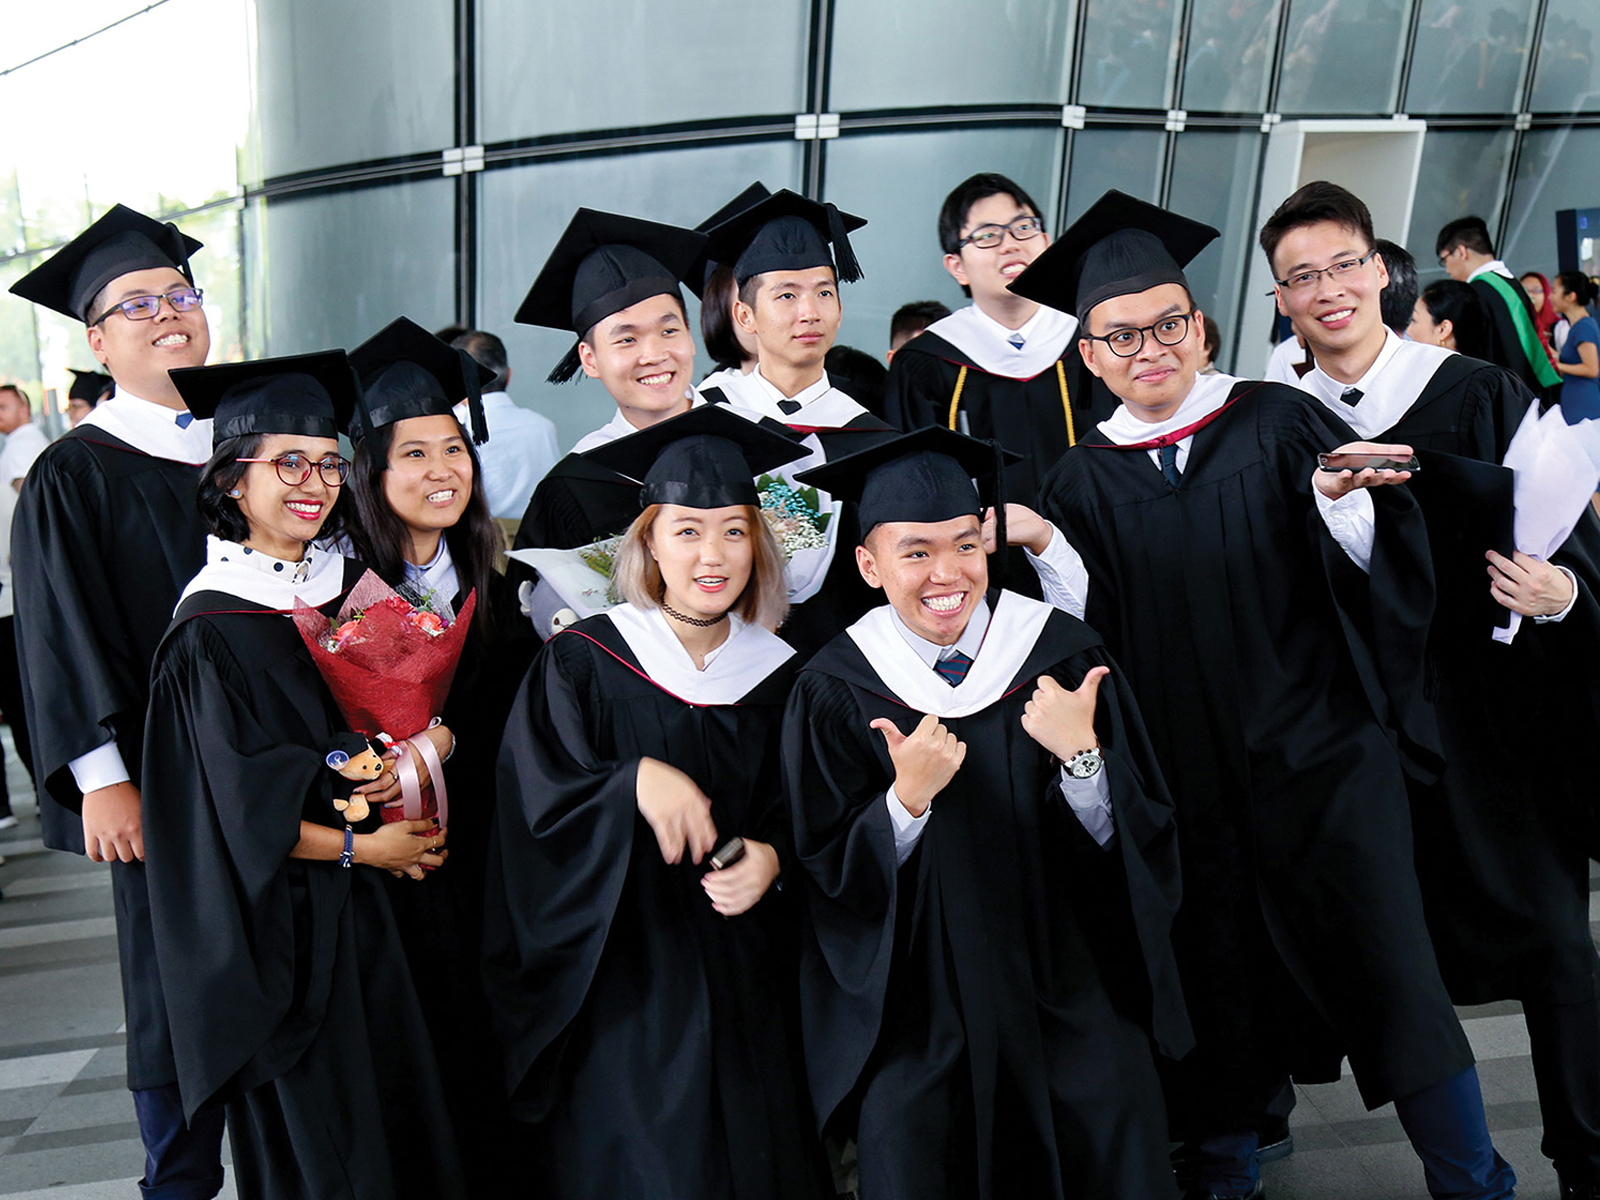 DigiPen (Singapore) graduates are all smiles at the 2017 commencement ceremony